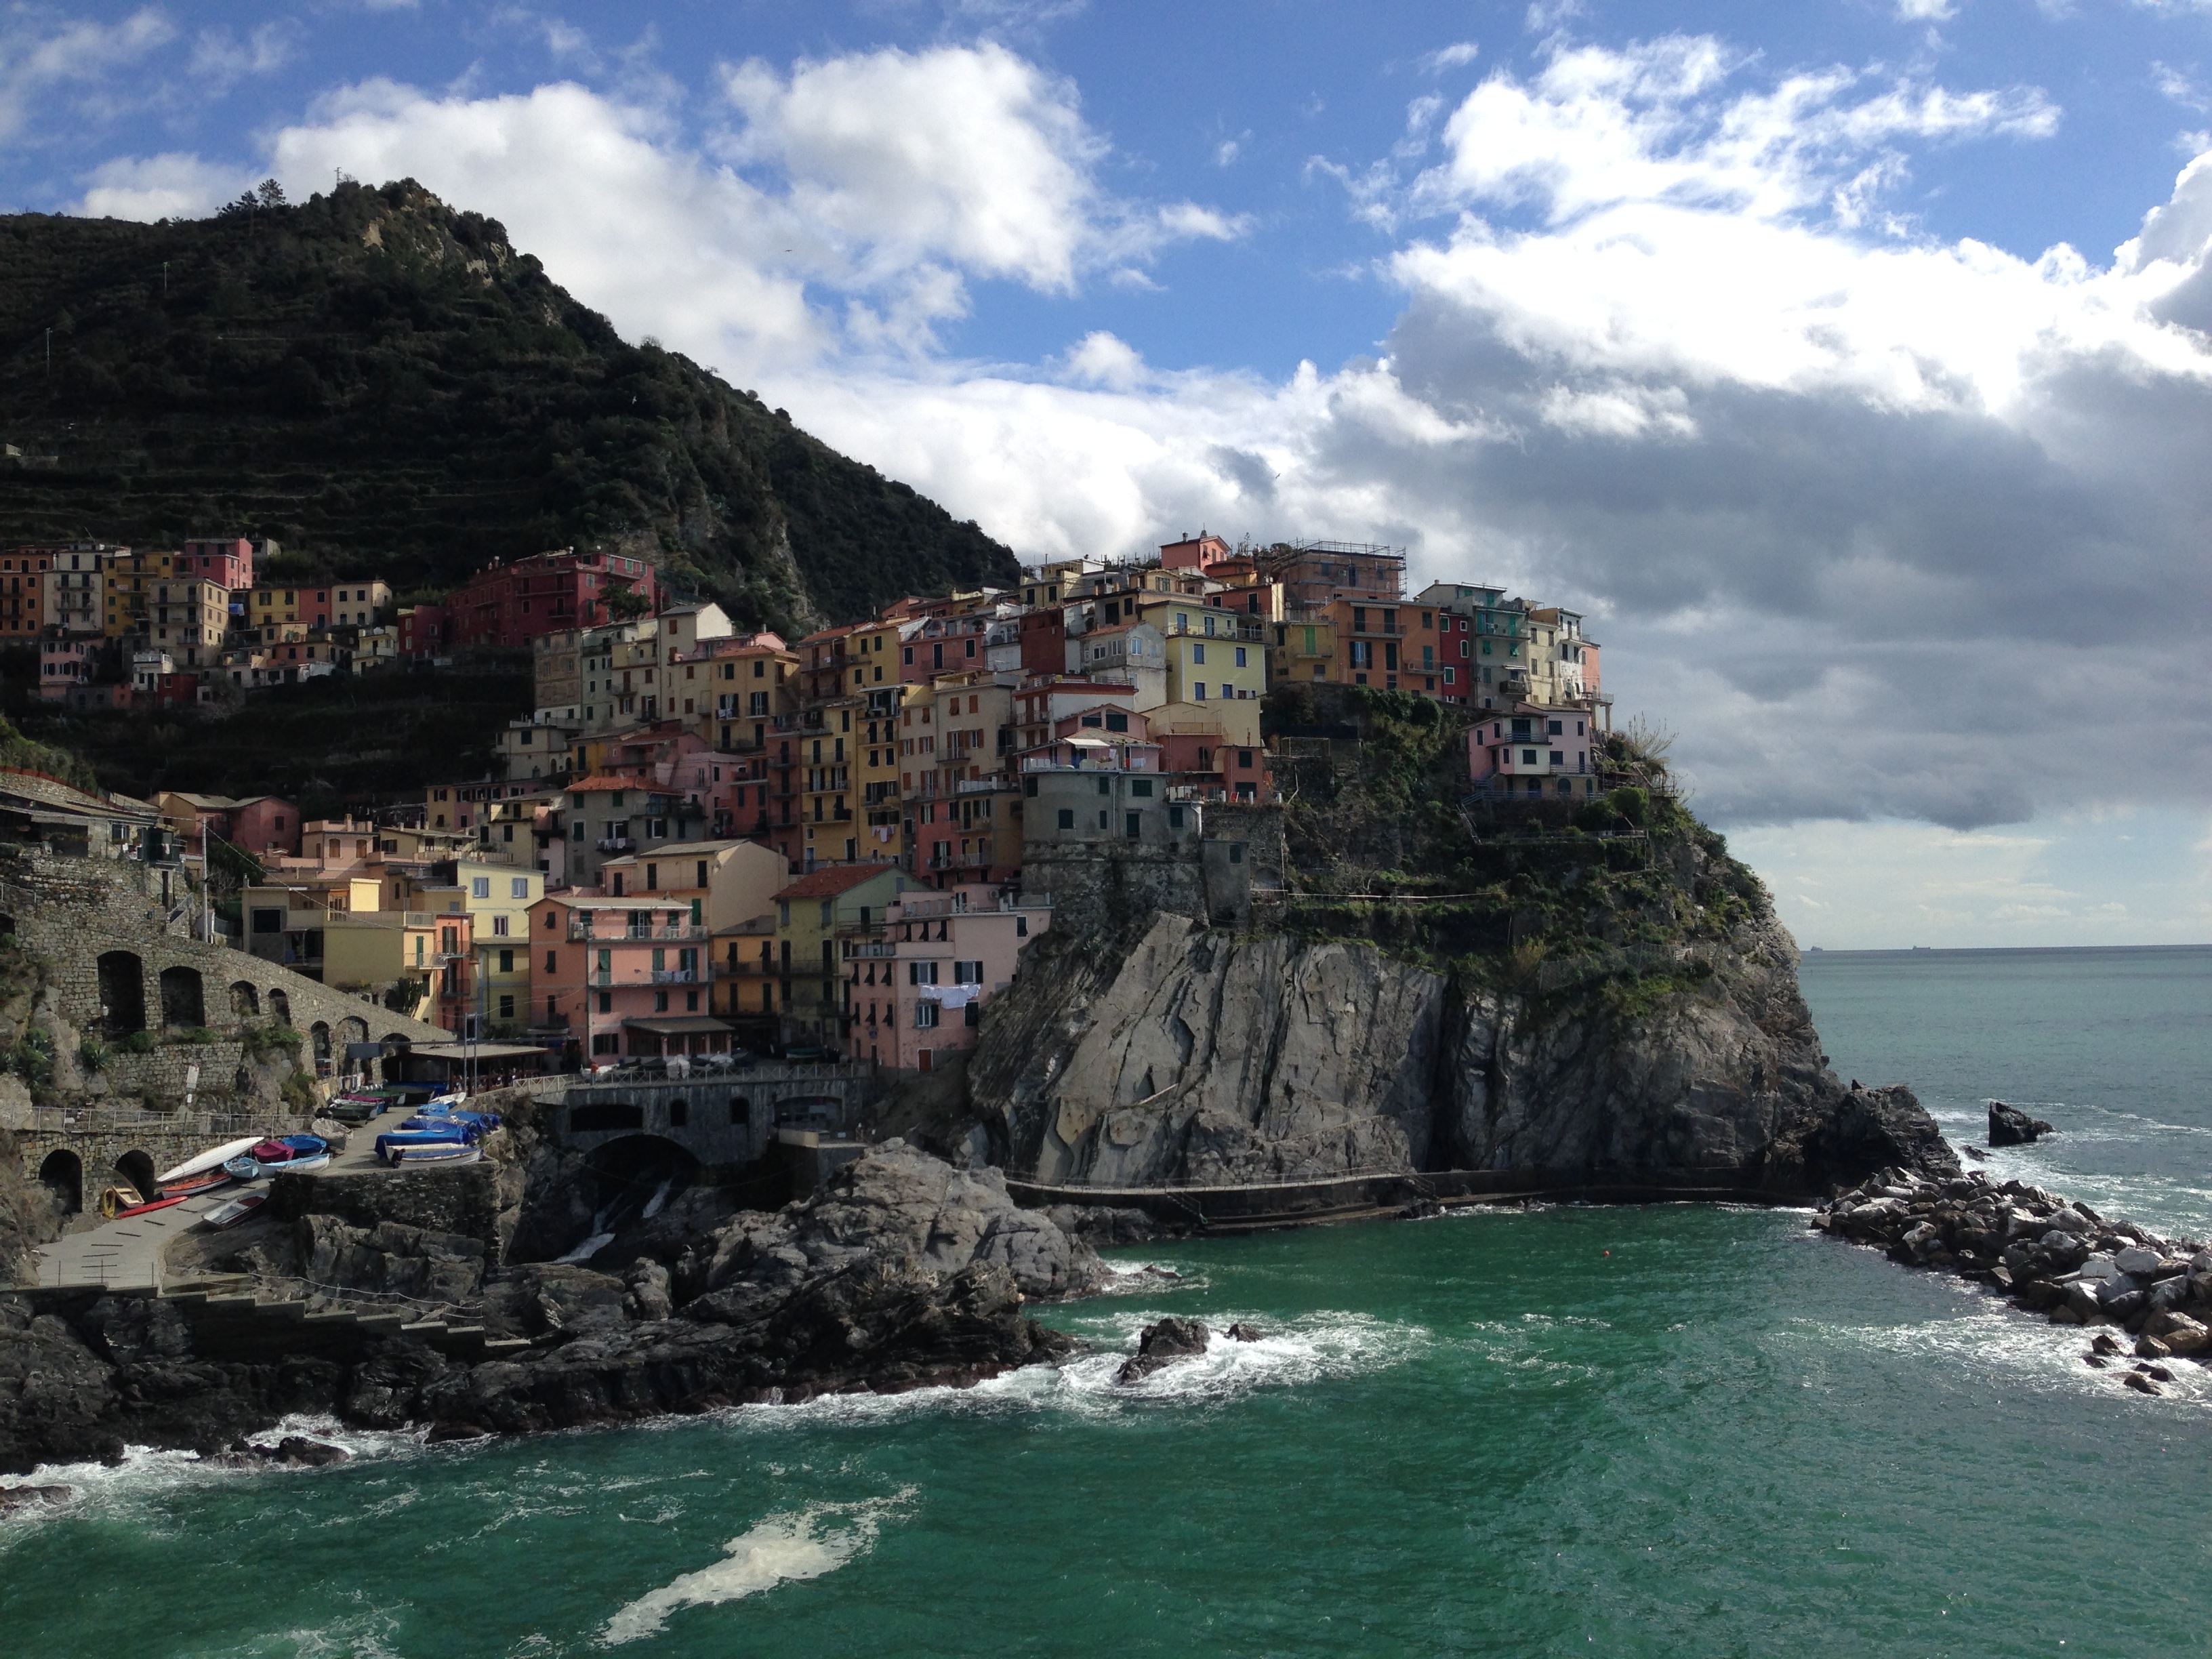 Italy Part 2: Vernazza and the Cinque Terre Region